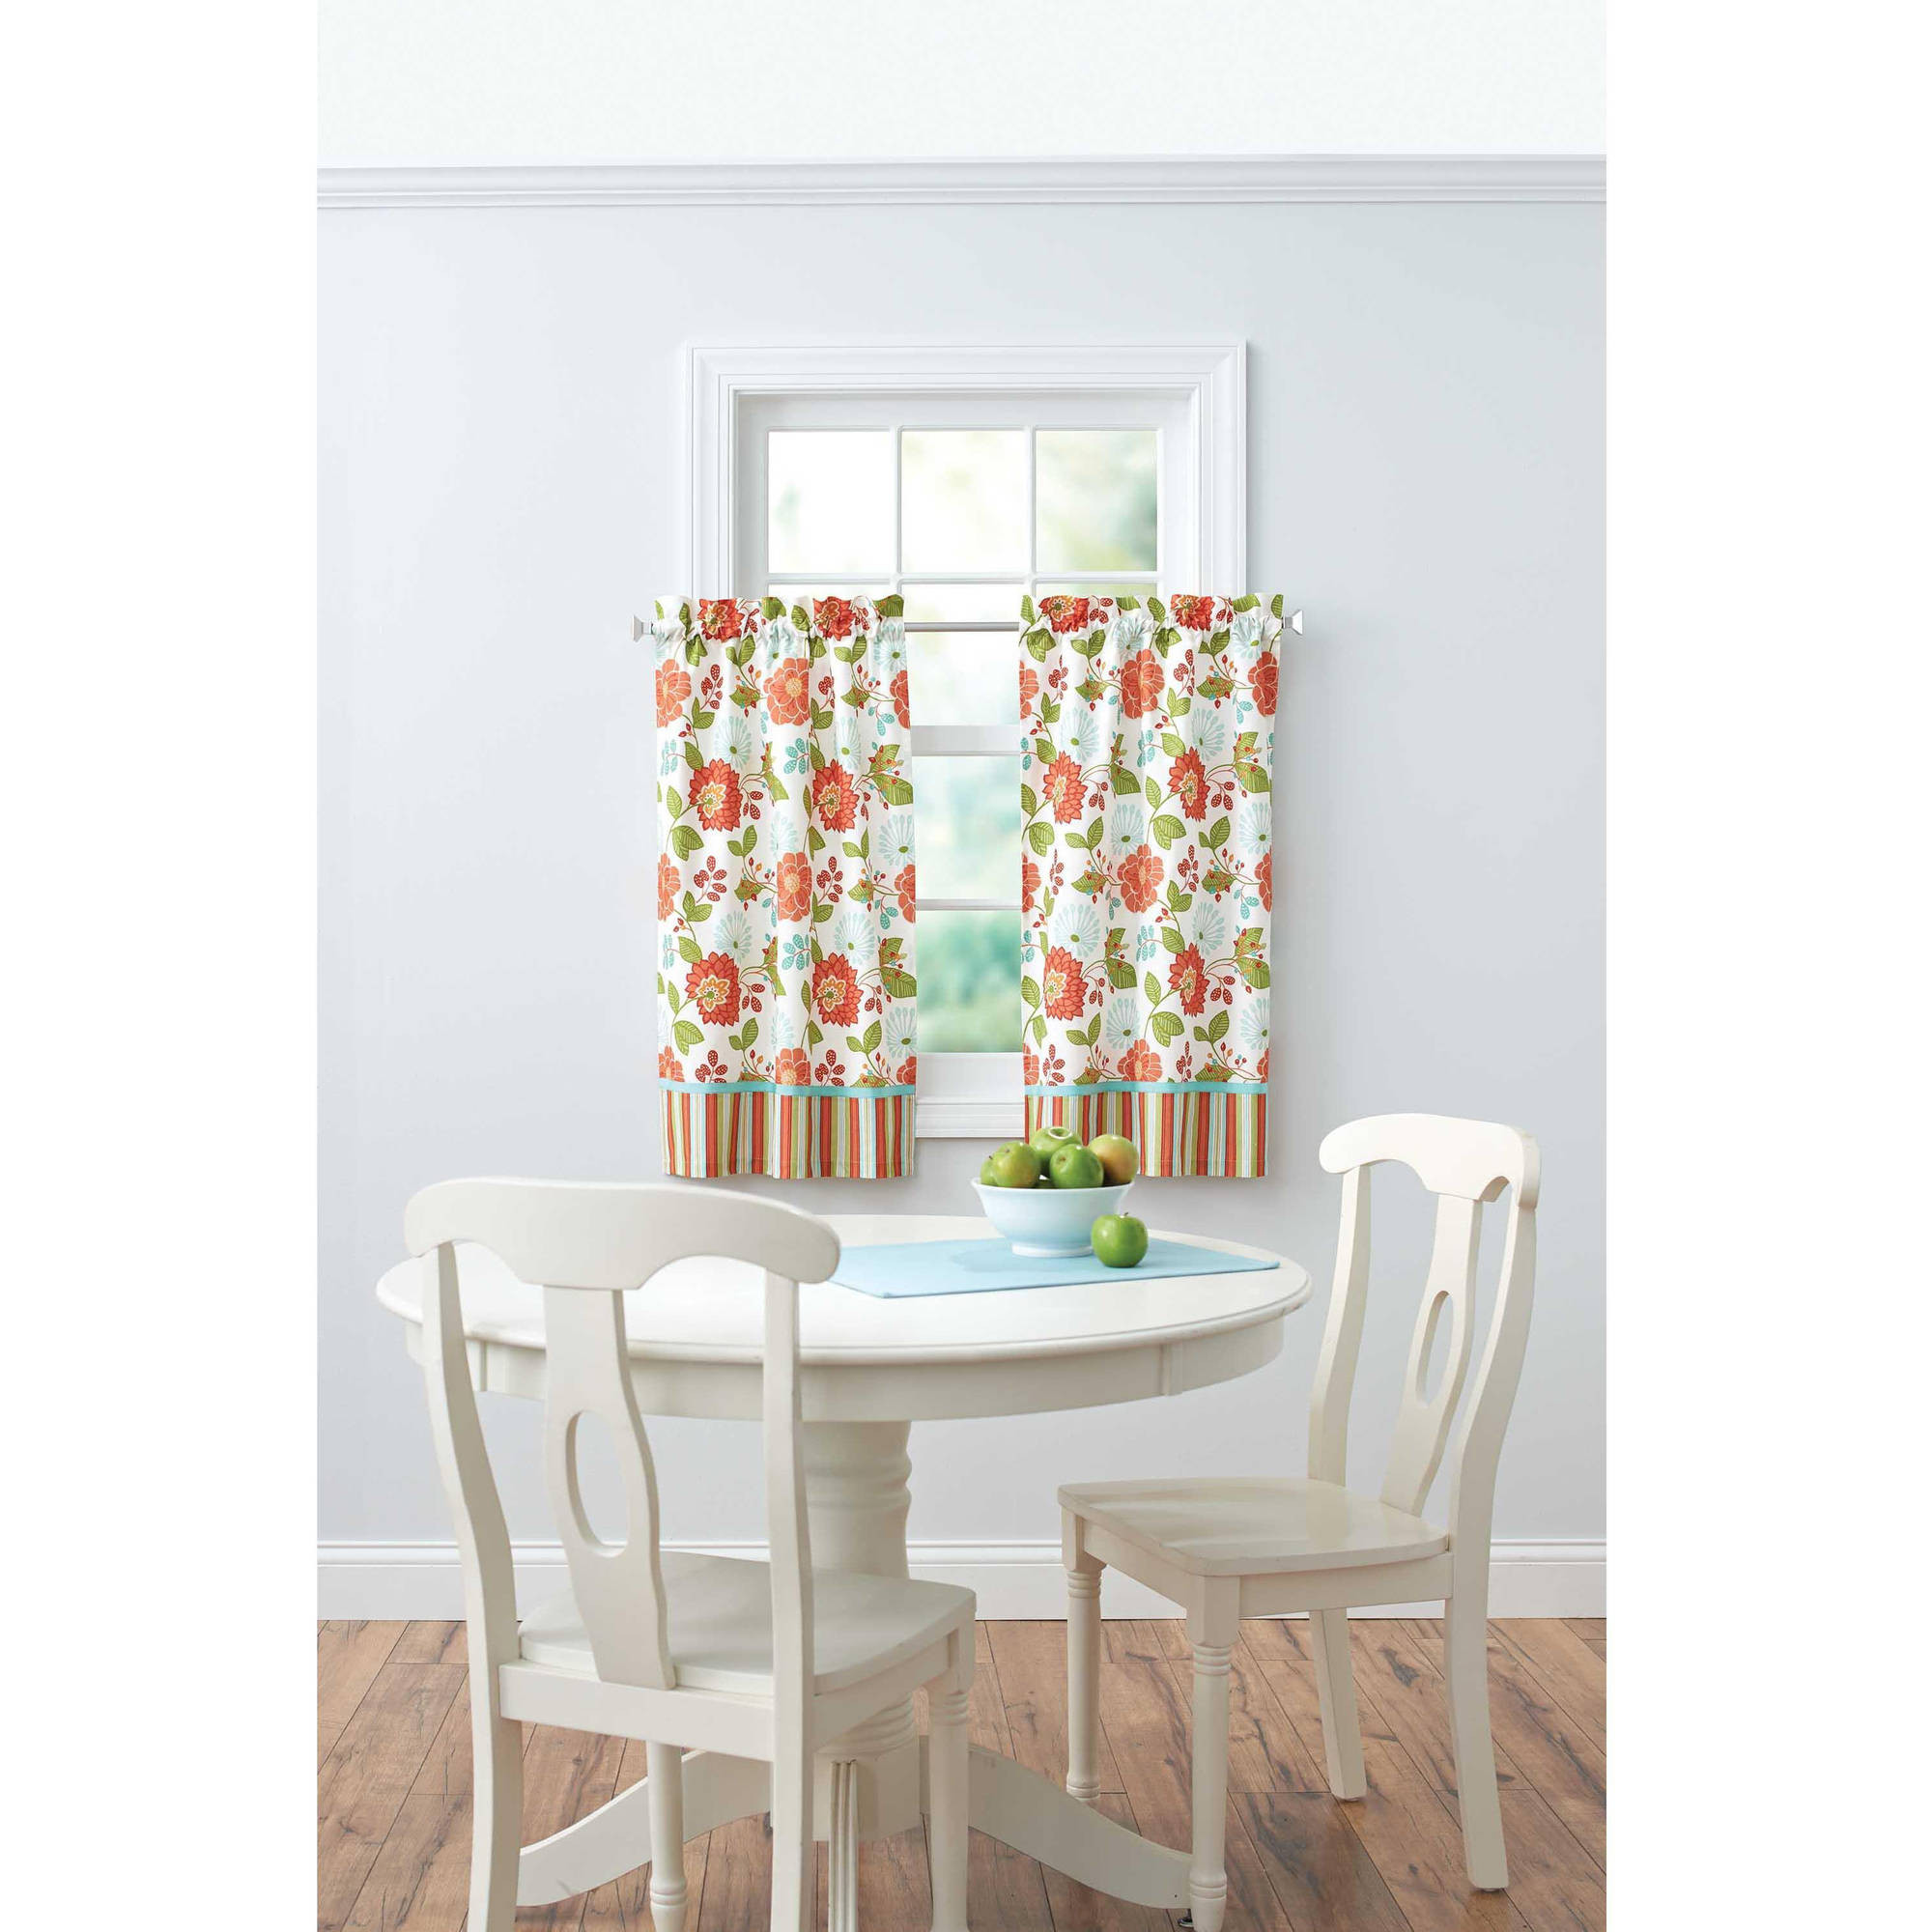 Kitchen Curtains Tiers
 Better Homes and Gardens Jacobean Stripe Kitchen Curtains